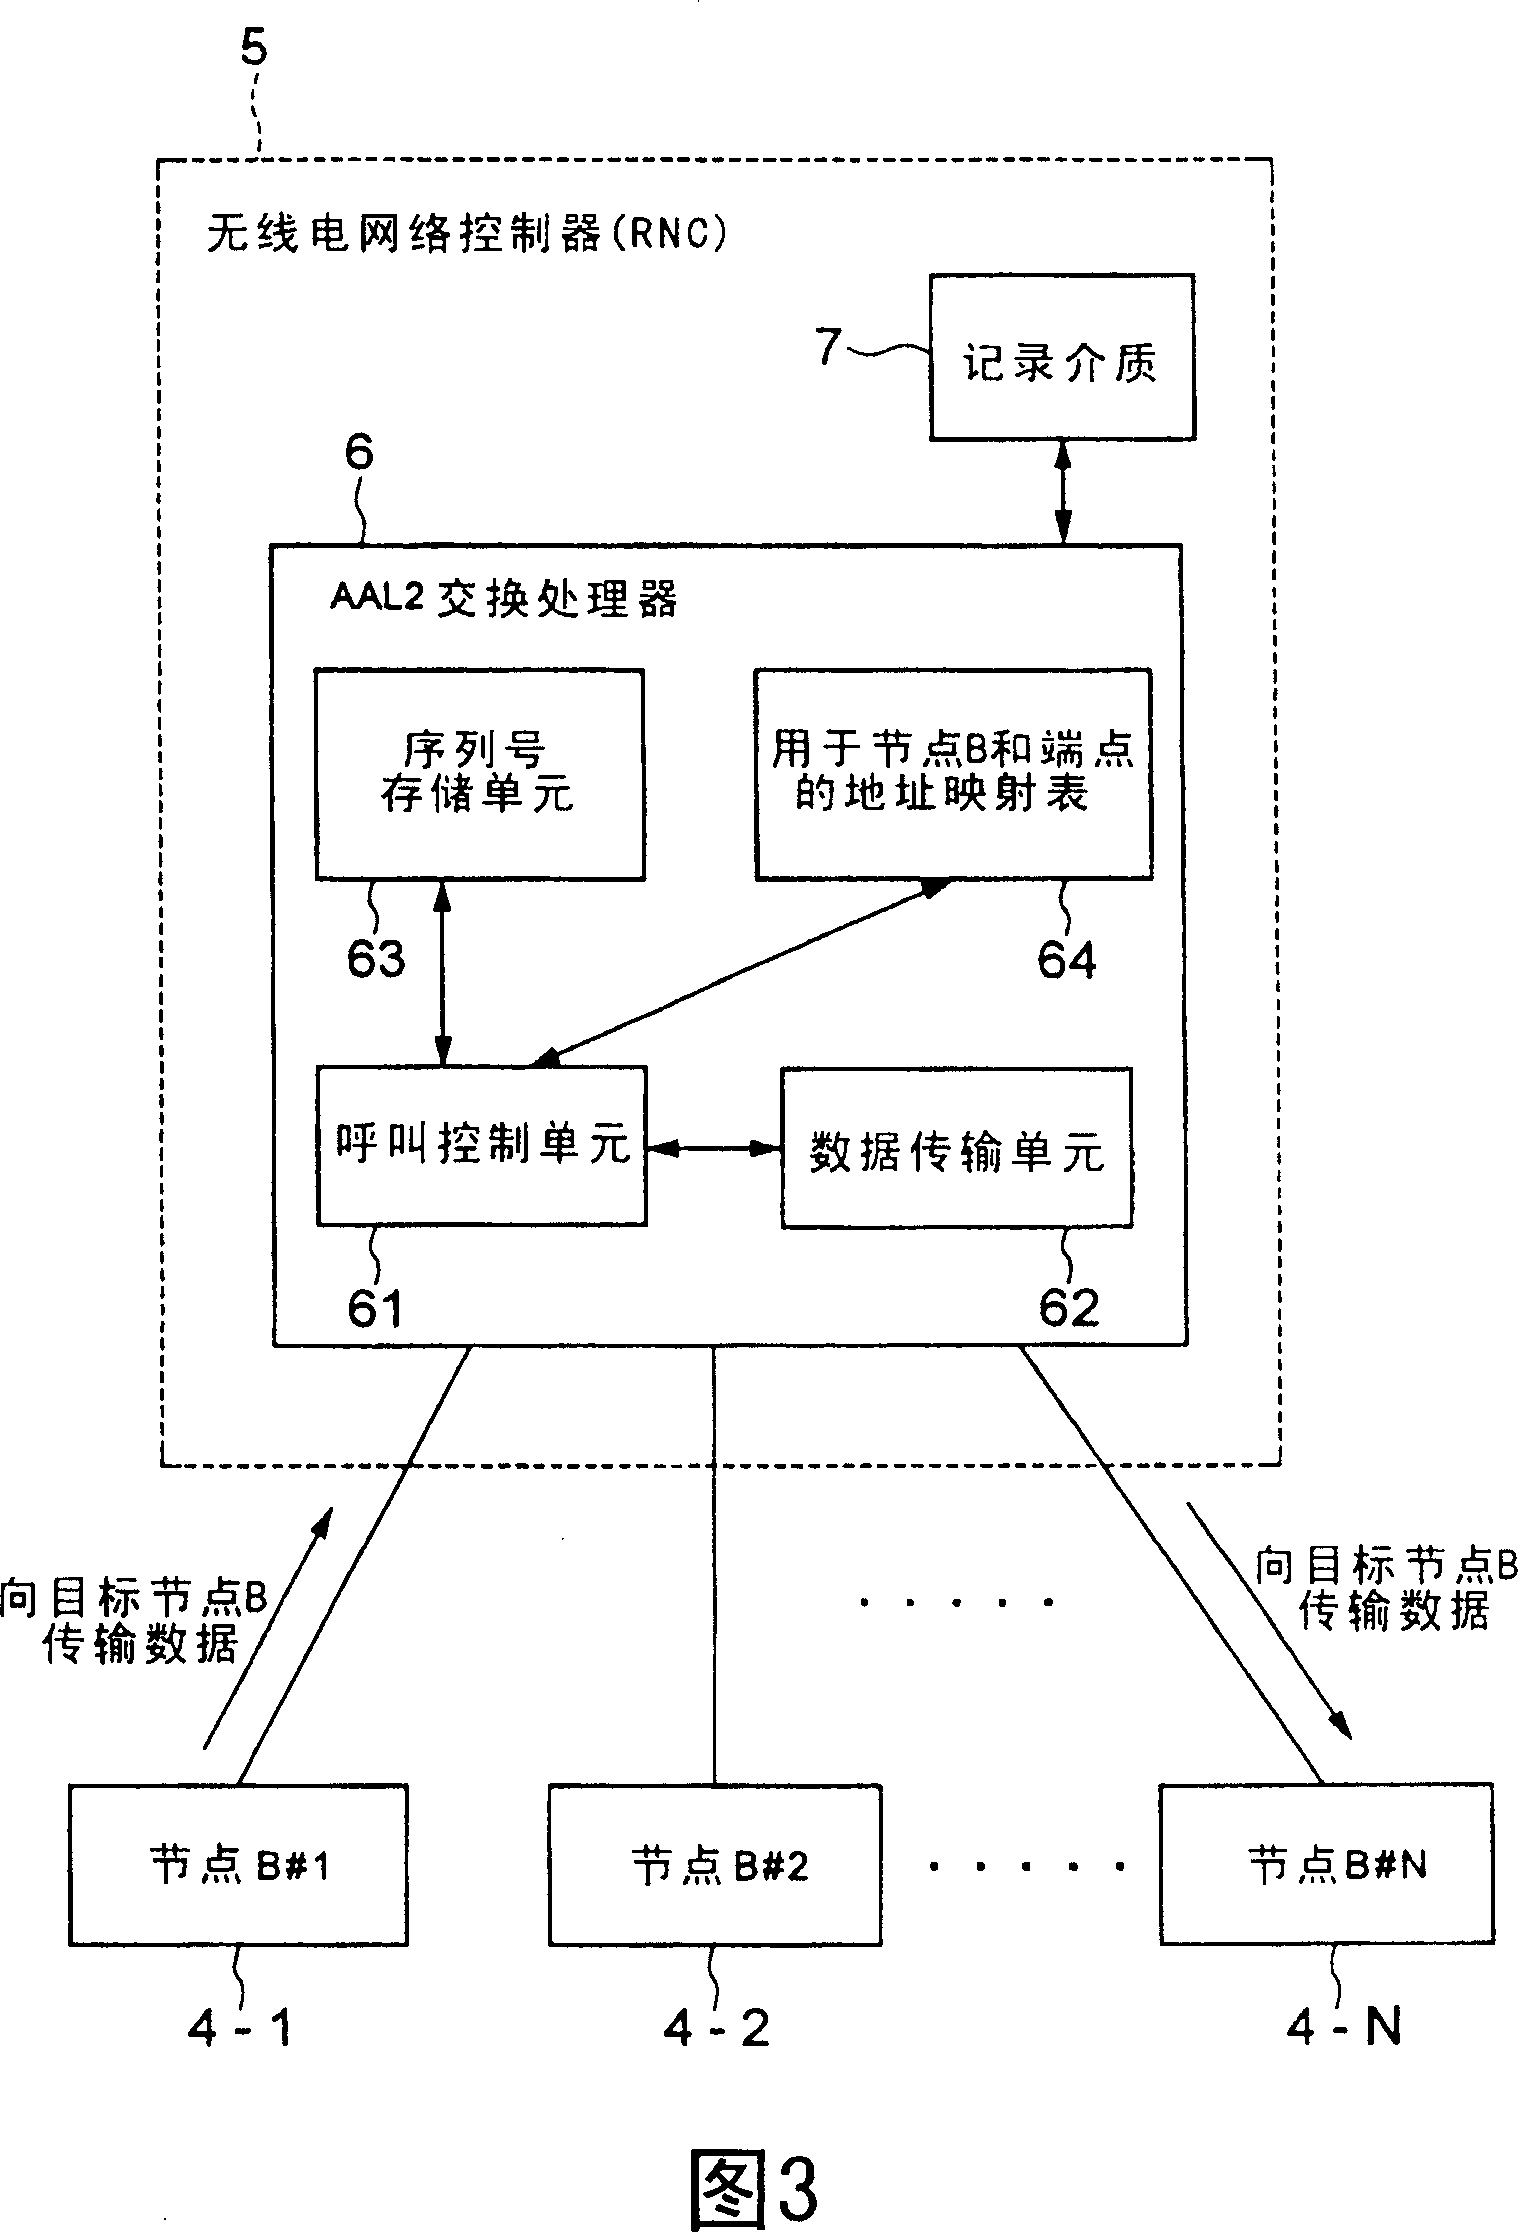 Mobile communicaton system, radio network controller and its data transmission method